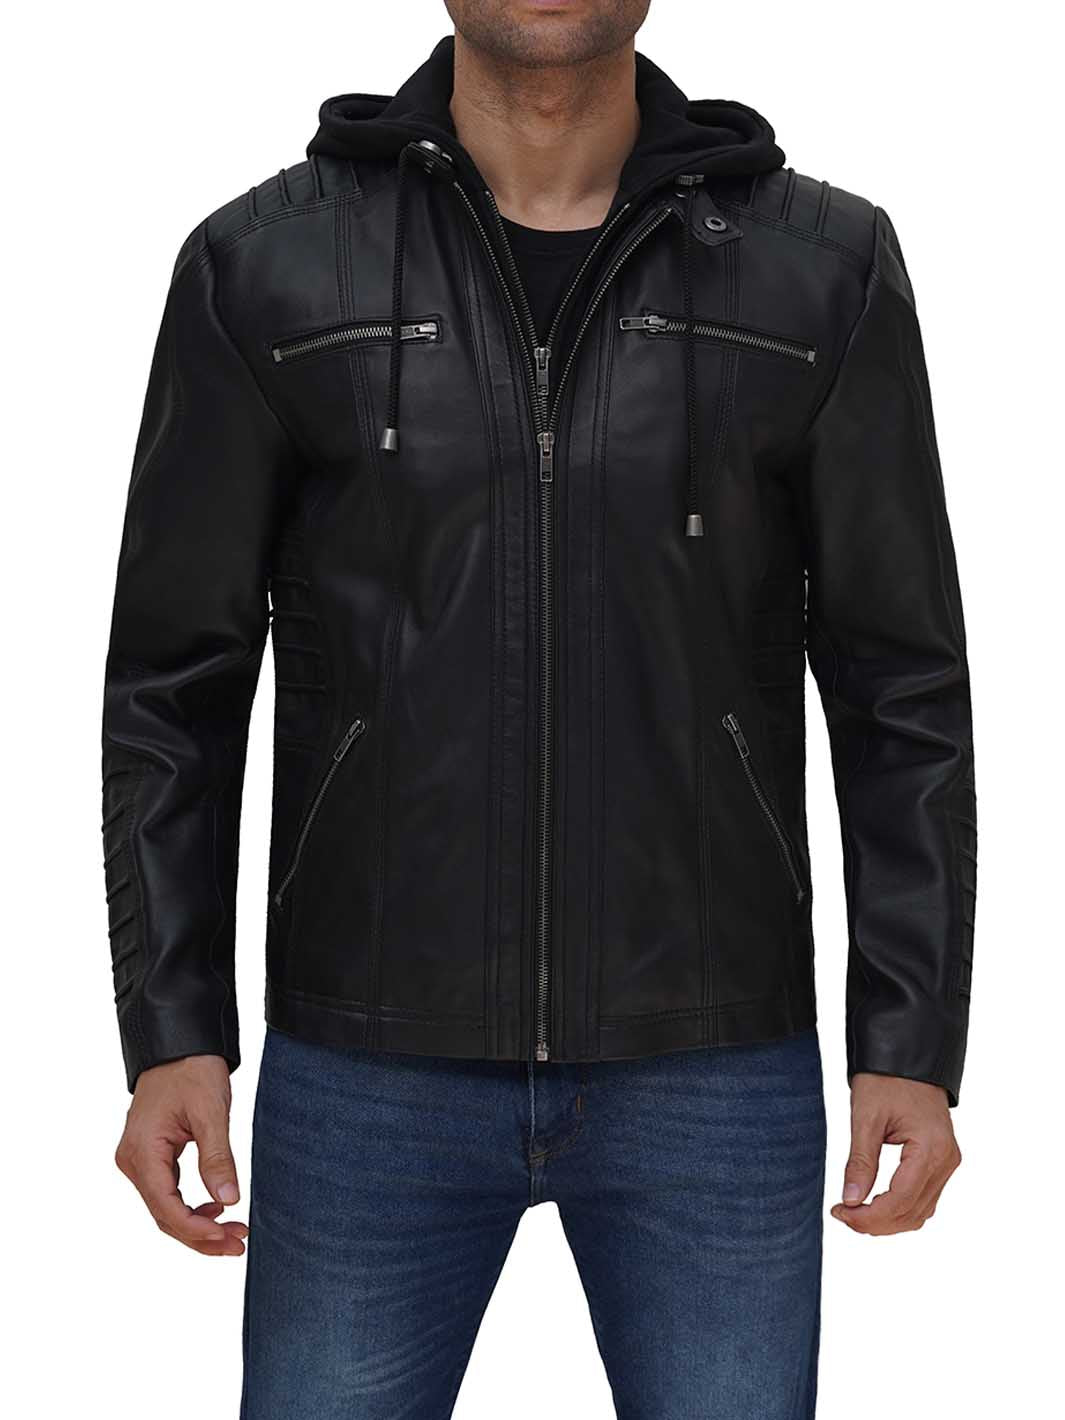 Black Cafe Racer Leather Jacket With Removable Hood